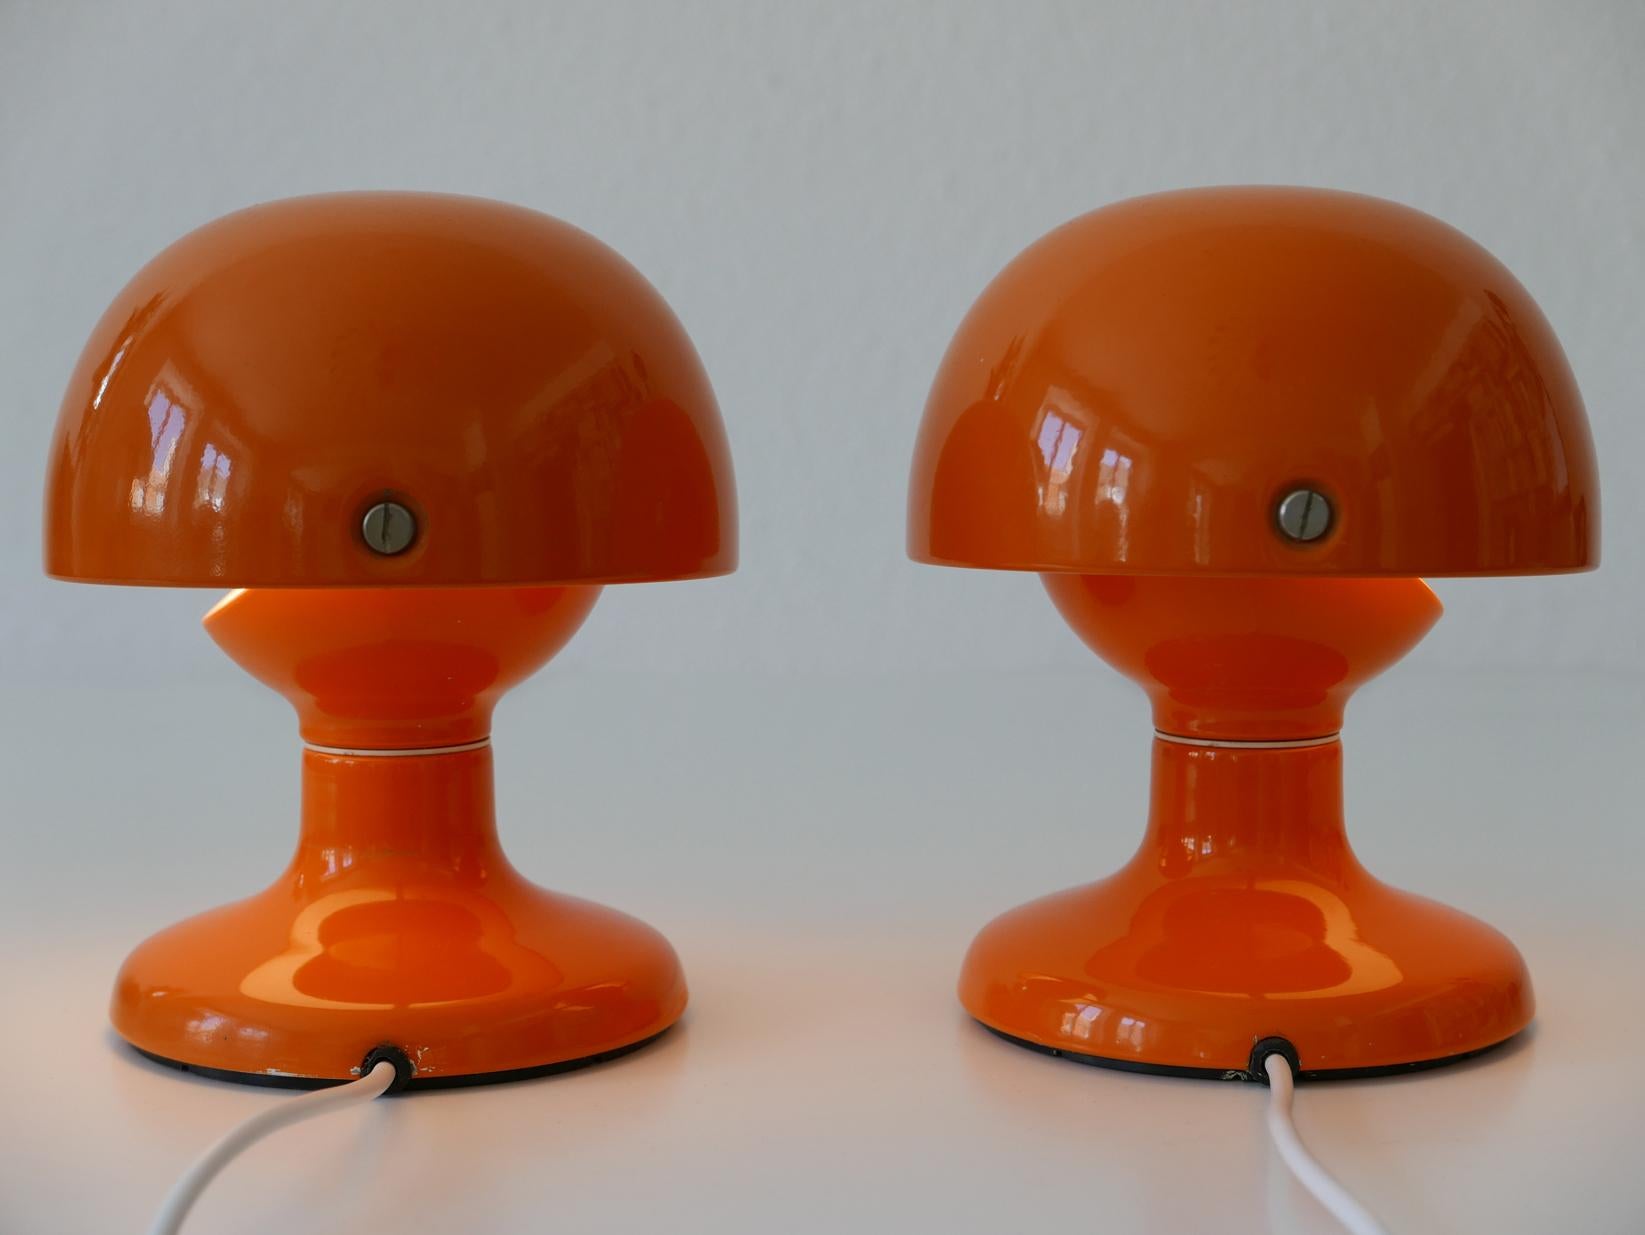 Pair of Mid-Century Modern Jucker Table Lamps by Afra & Tobia Scarpa, 1960s For Sale 2